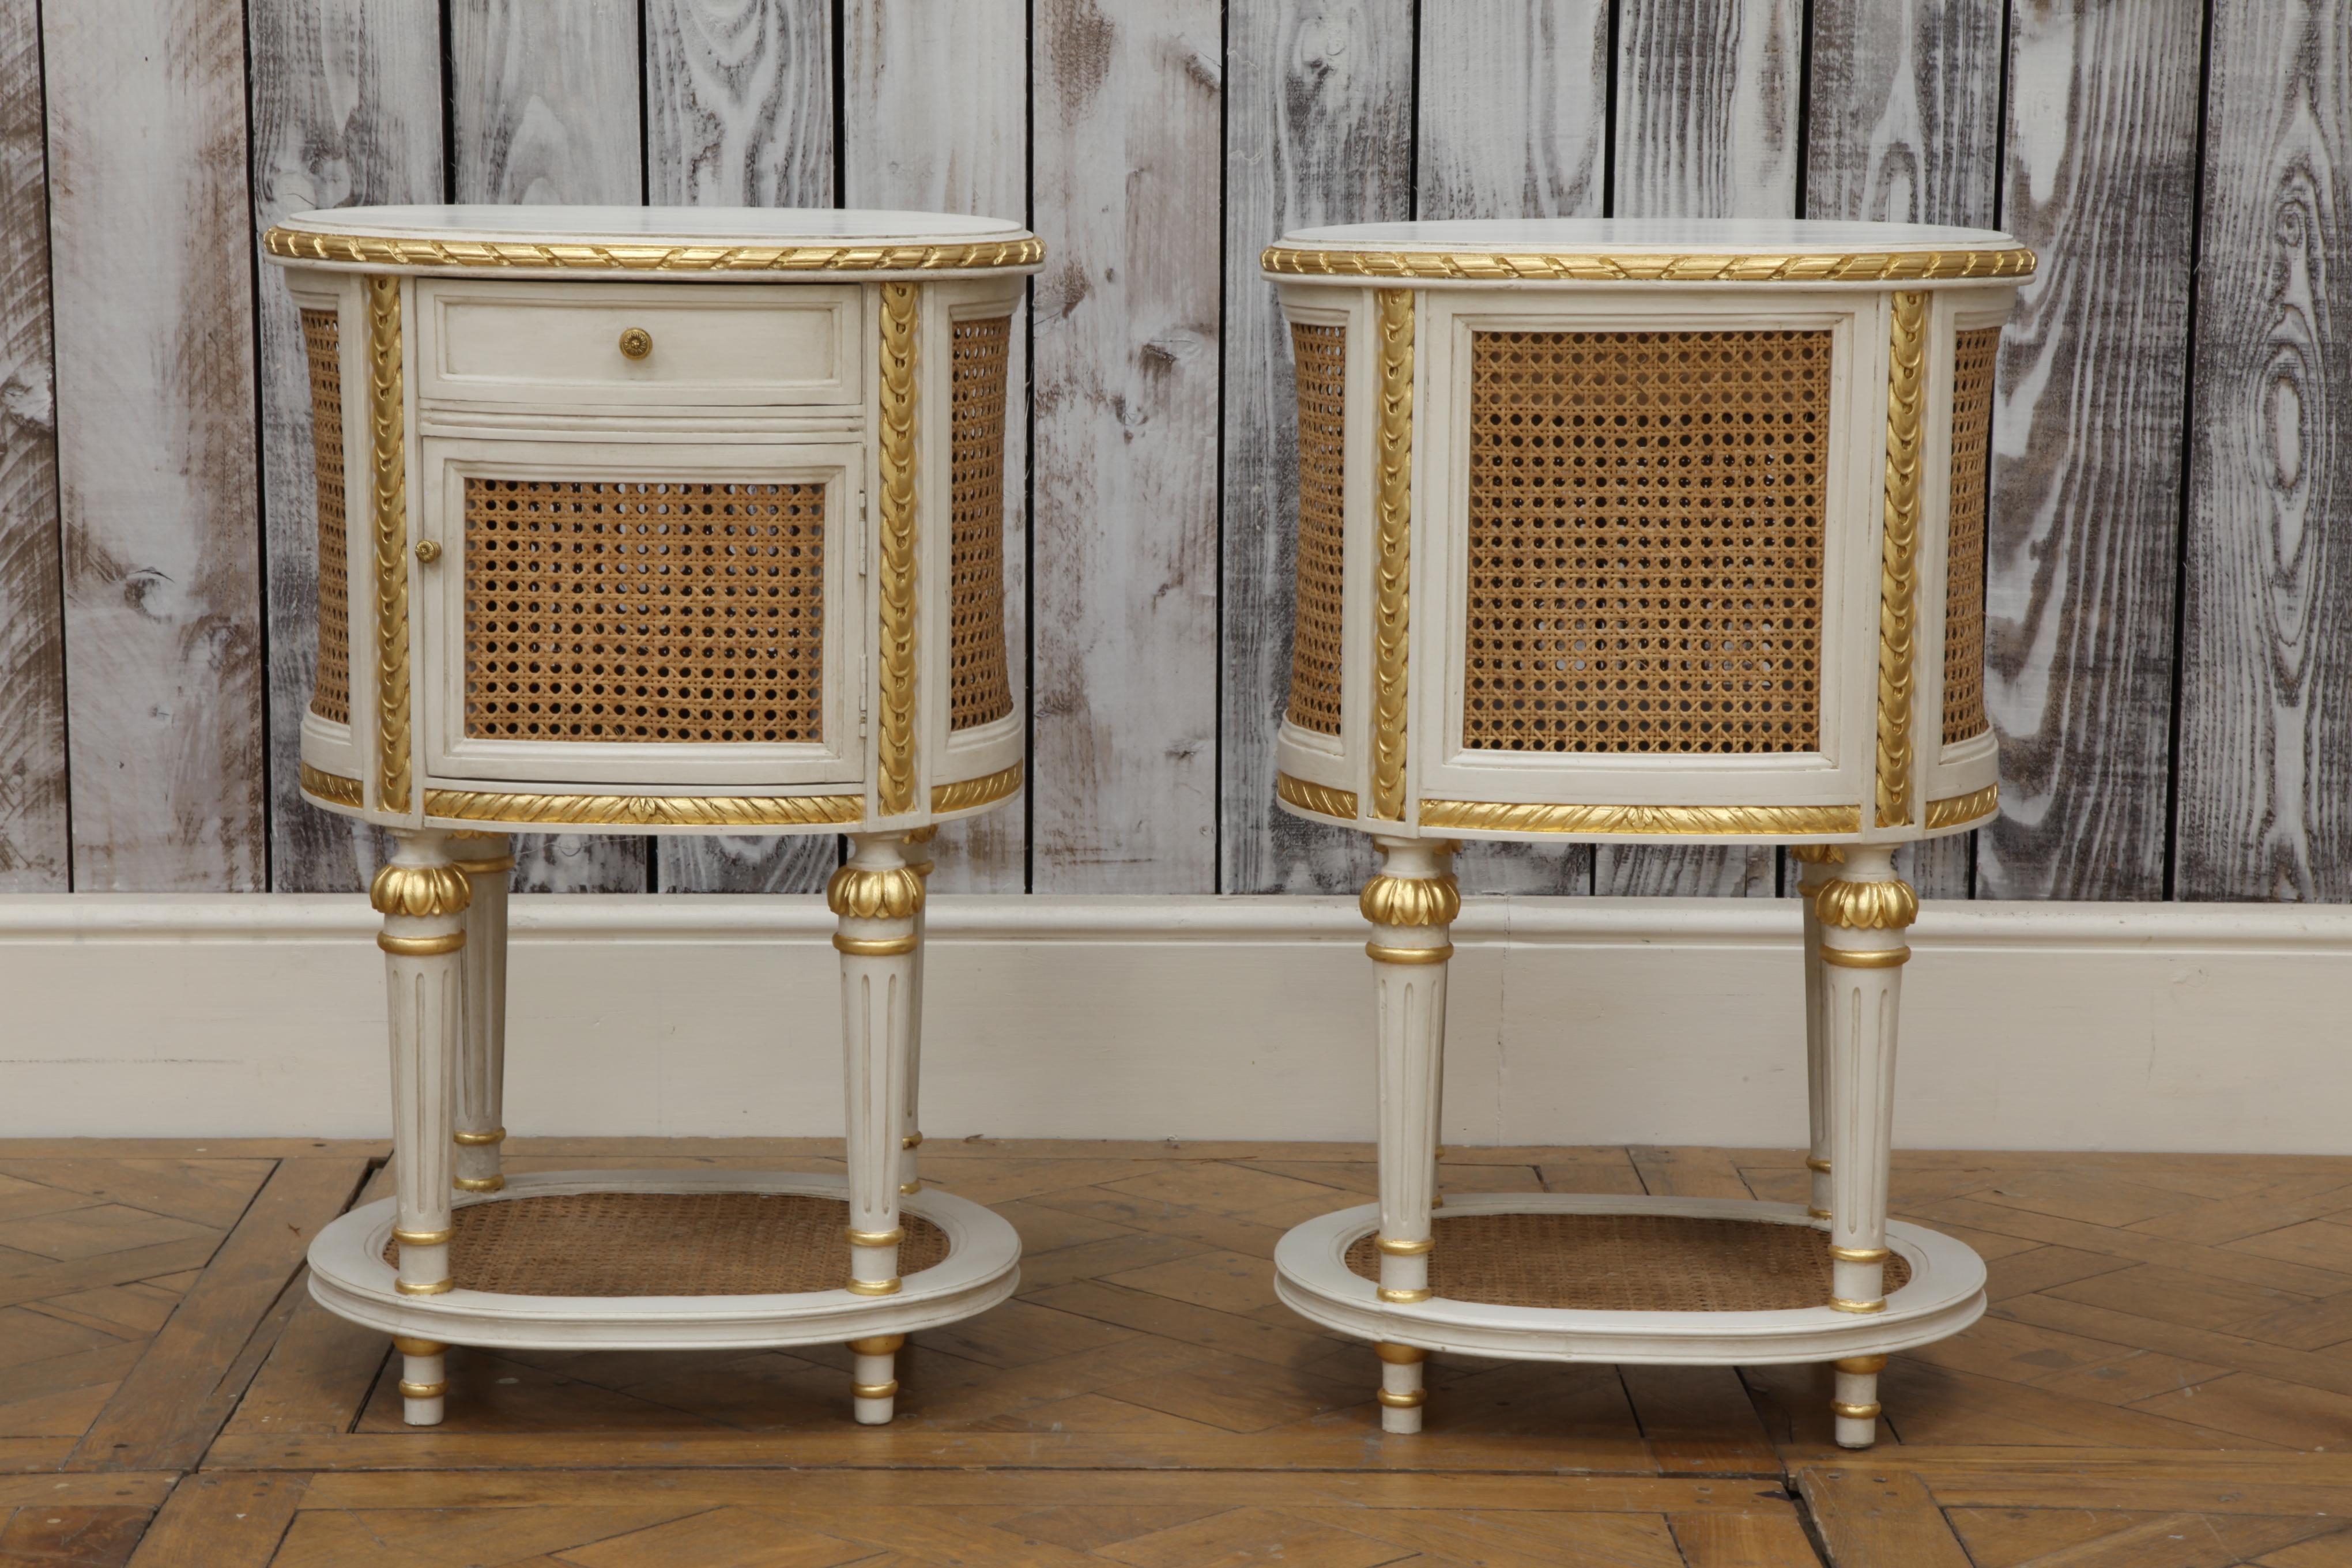 A pair of bedside tables in the LXVI style made by the master craftsmen of La Maison London, finished, in house, in an old white patina highlighted with hand applied, antique gold highlights to accentuate the carved details of the period's styling.